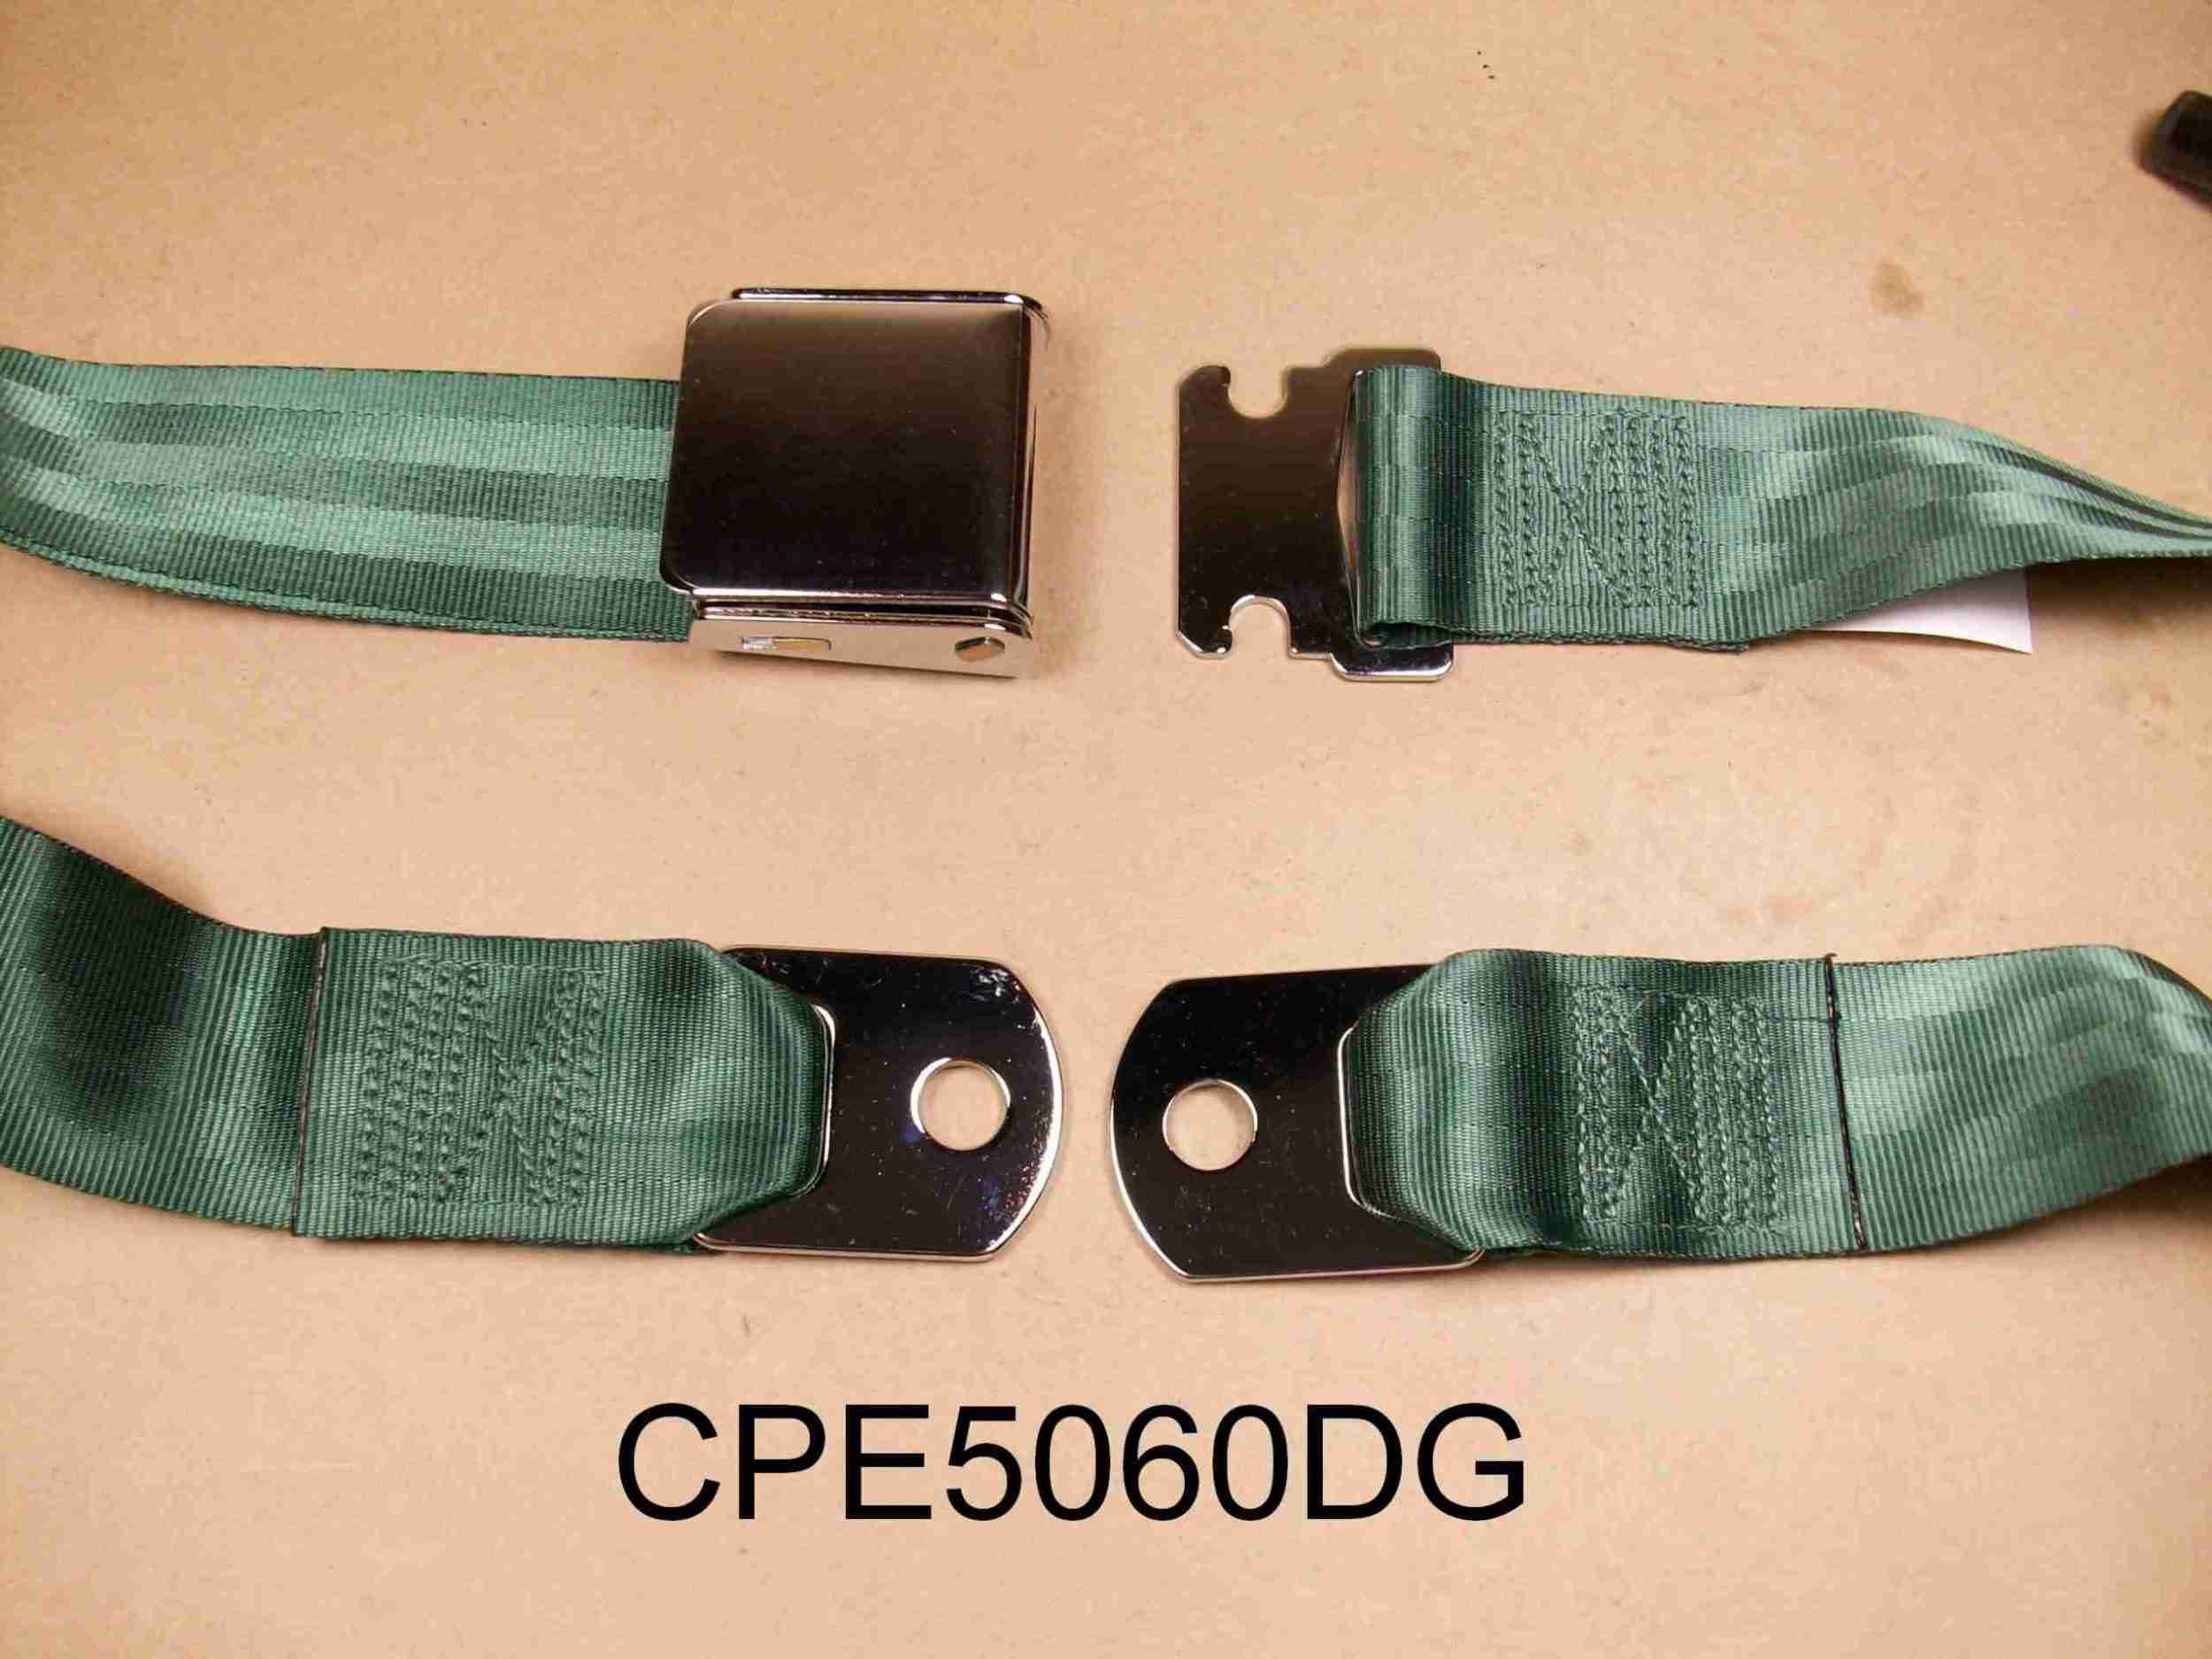 1926-65 60" Dark Green Seat Belt w/ Chrome Aircraft-Style Buckle, 2-point non-retractable lap belt, comes w/ hardware